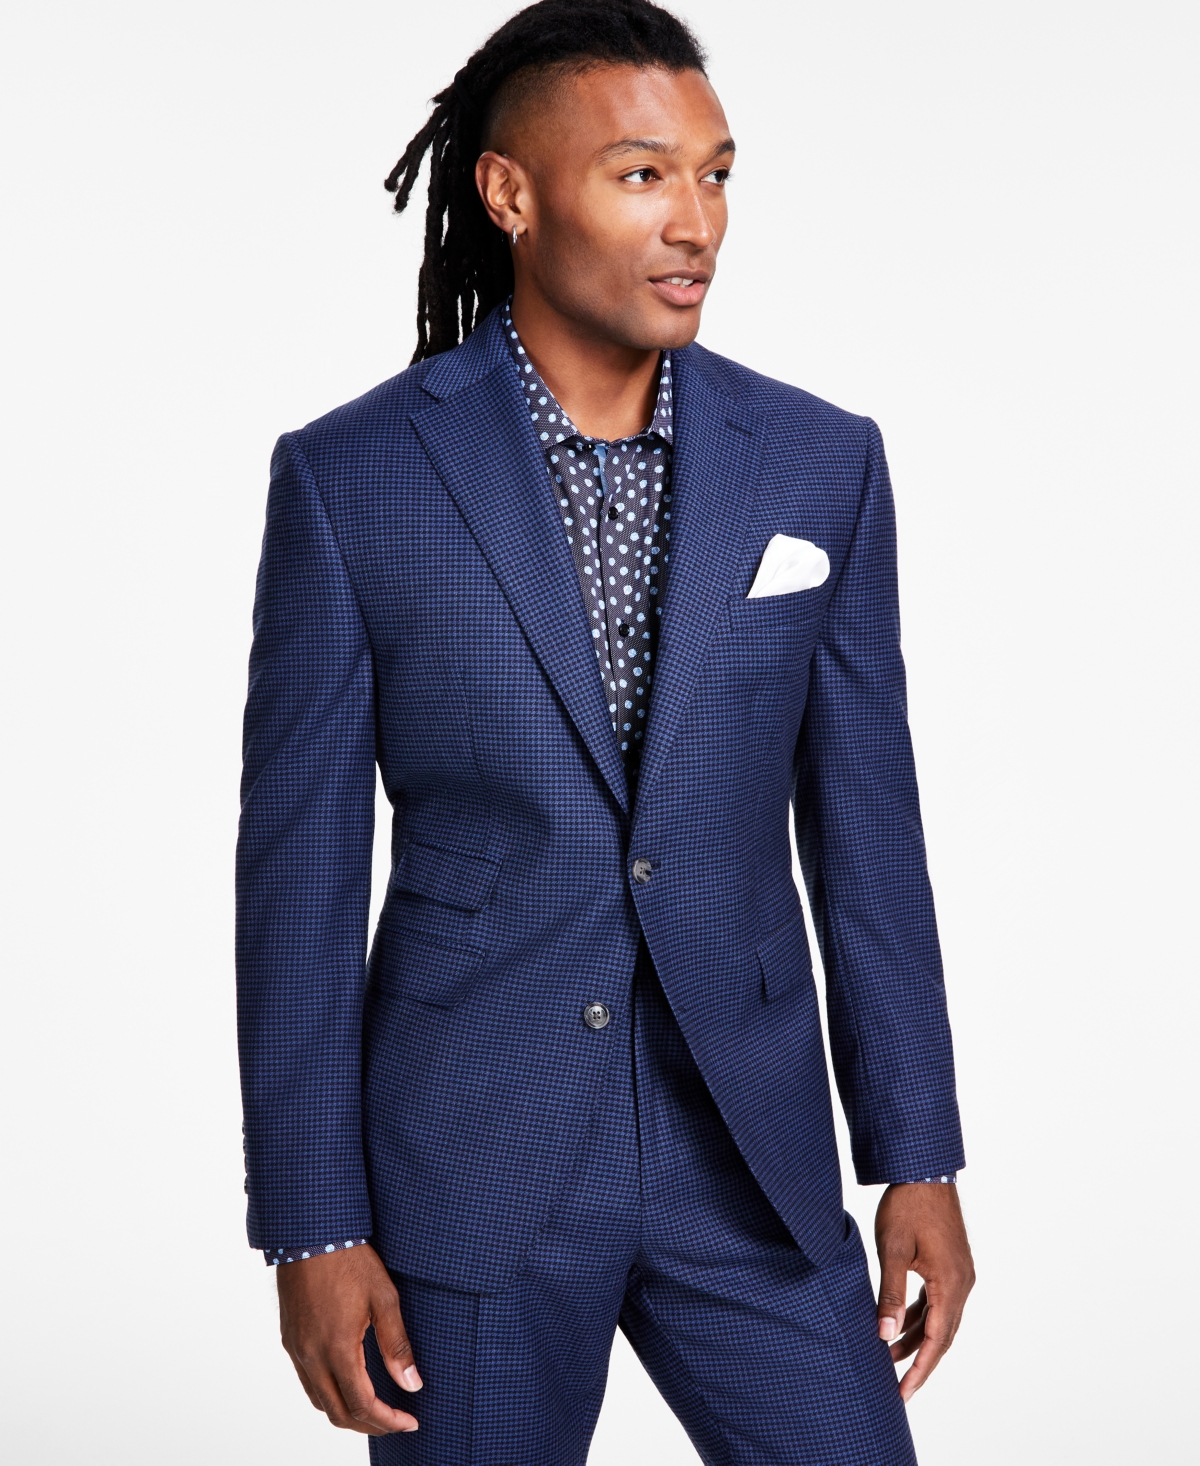 Men's Classic-Fit Stretch Navy Houndstooth Suit Separates Jacket - Navy Houndstooth